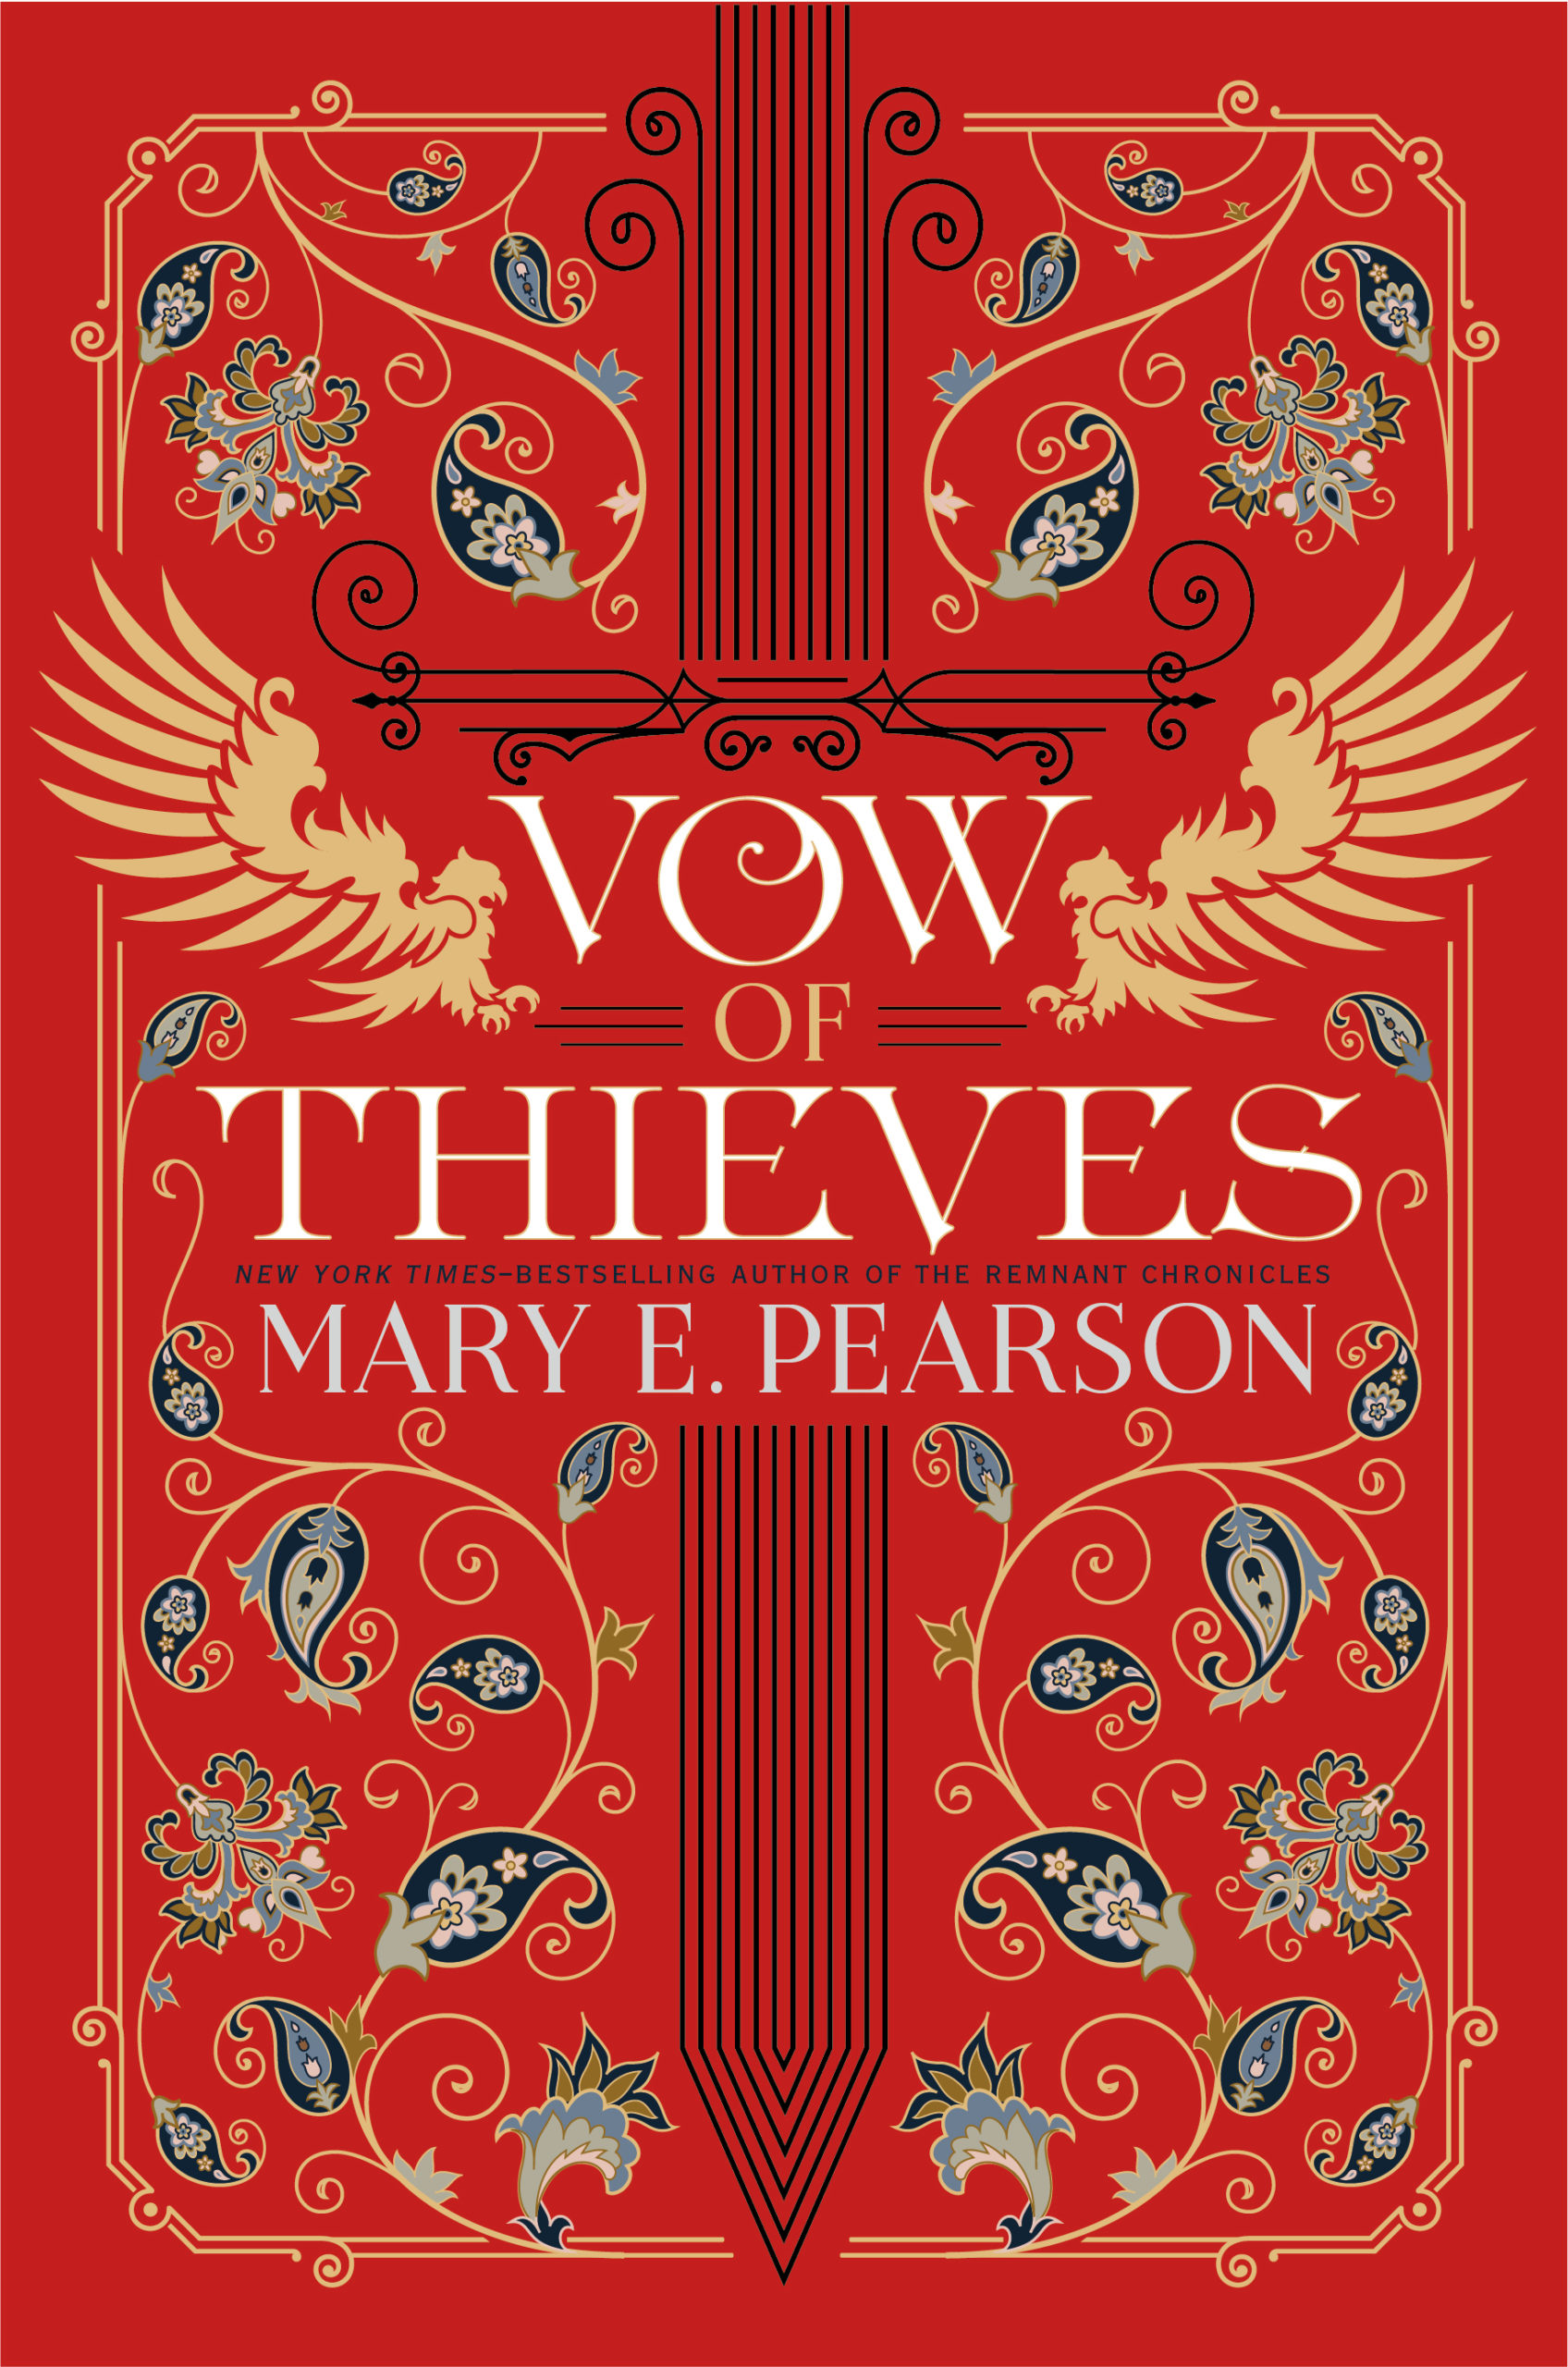 Book Vow of Thieves